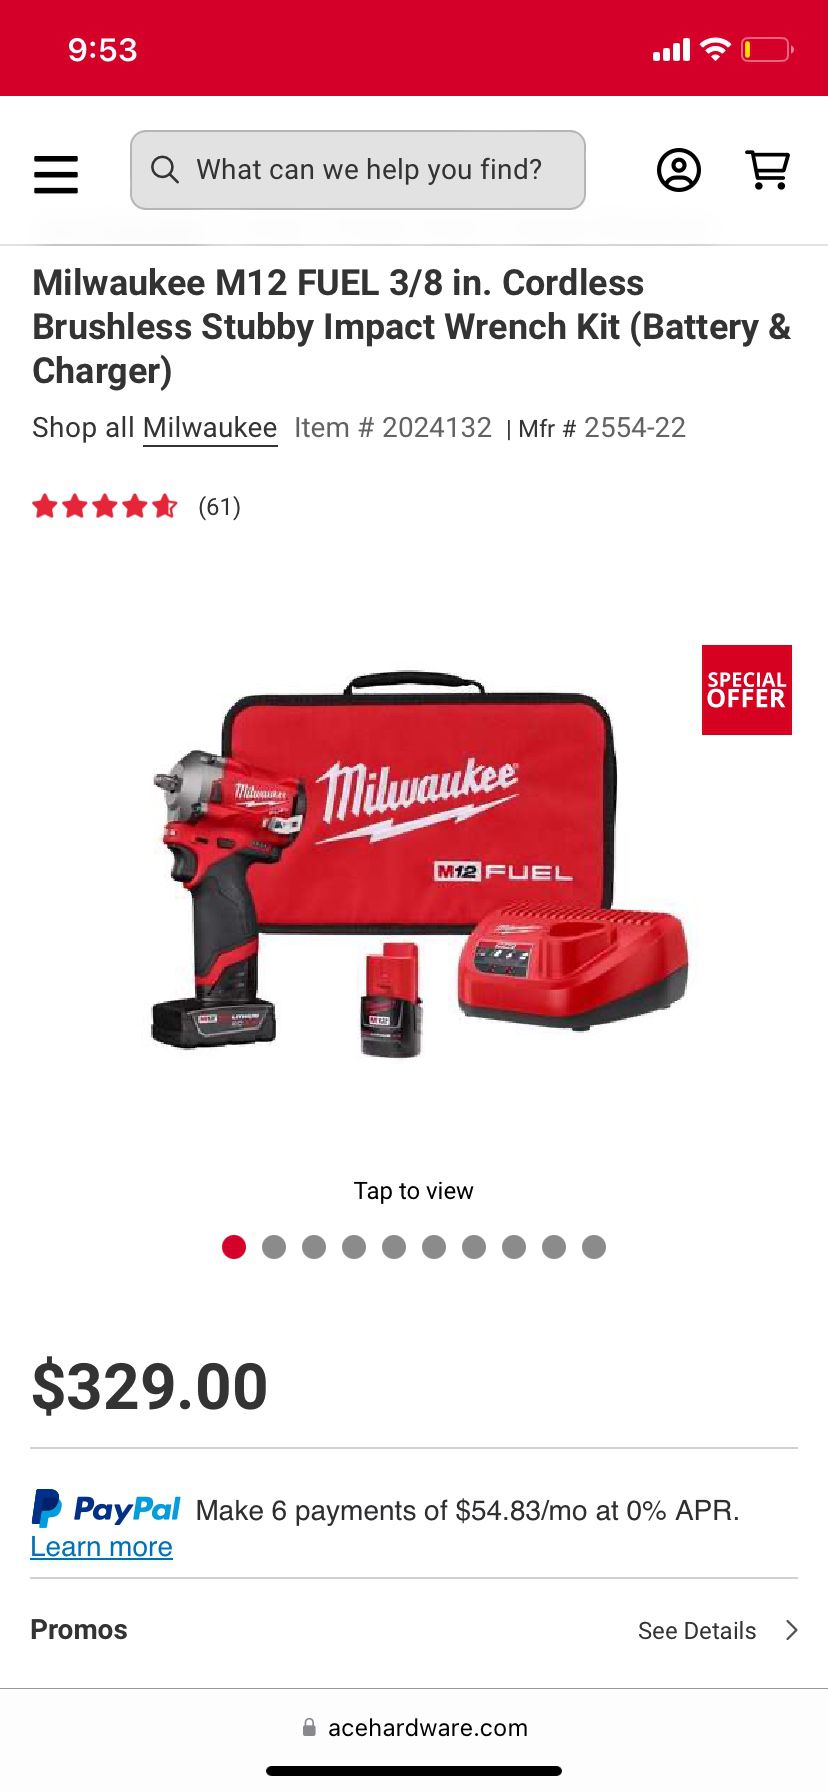 Milwaukee M12 FUEL 3/8 in. Cordless Brushless Stubby Impact Wrench Kit (Battery & Charger)